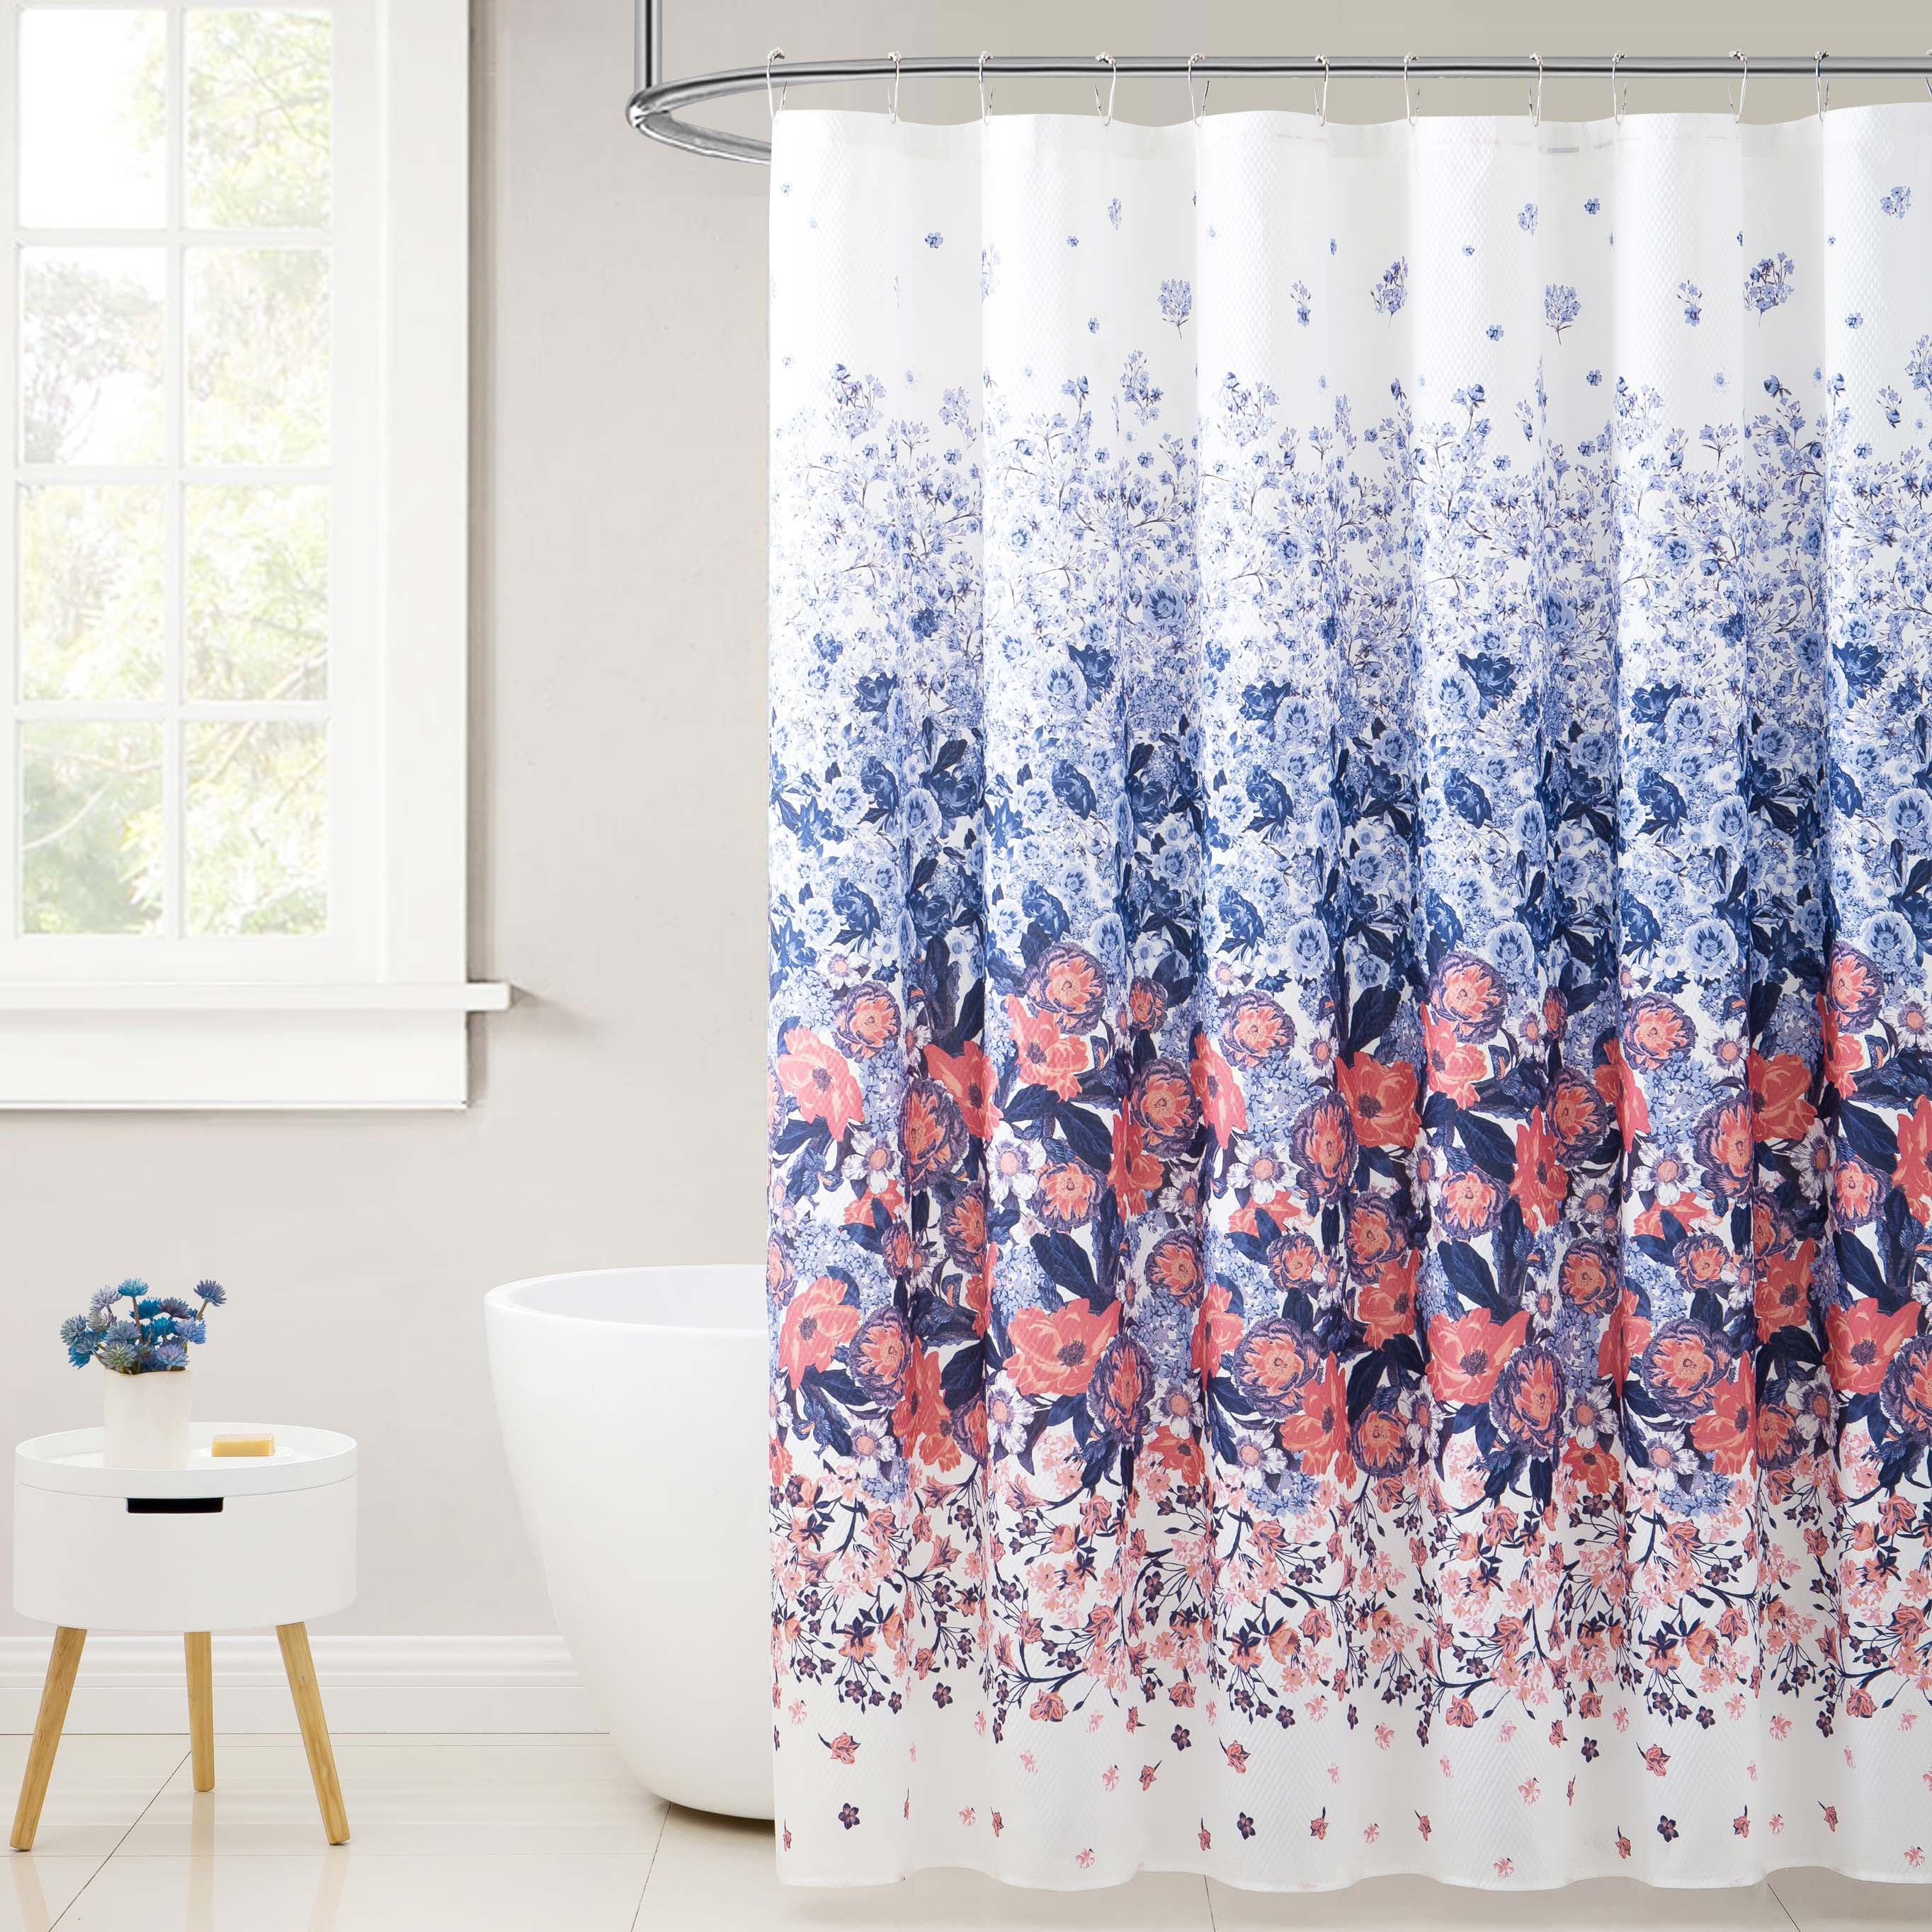 Fabric Shower Curtain For Bathroom White With Navy And Orange Coral Floral Design 72in X72 In